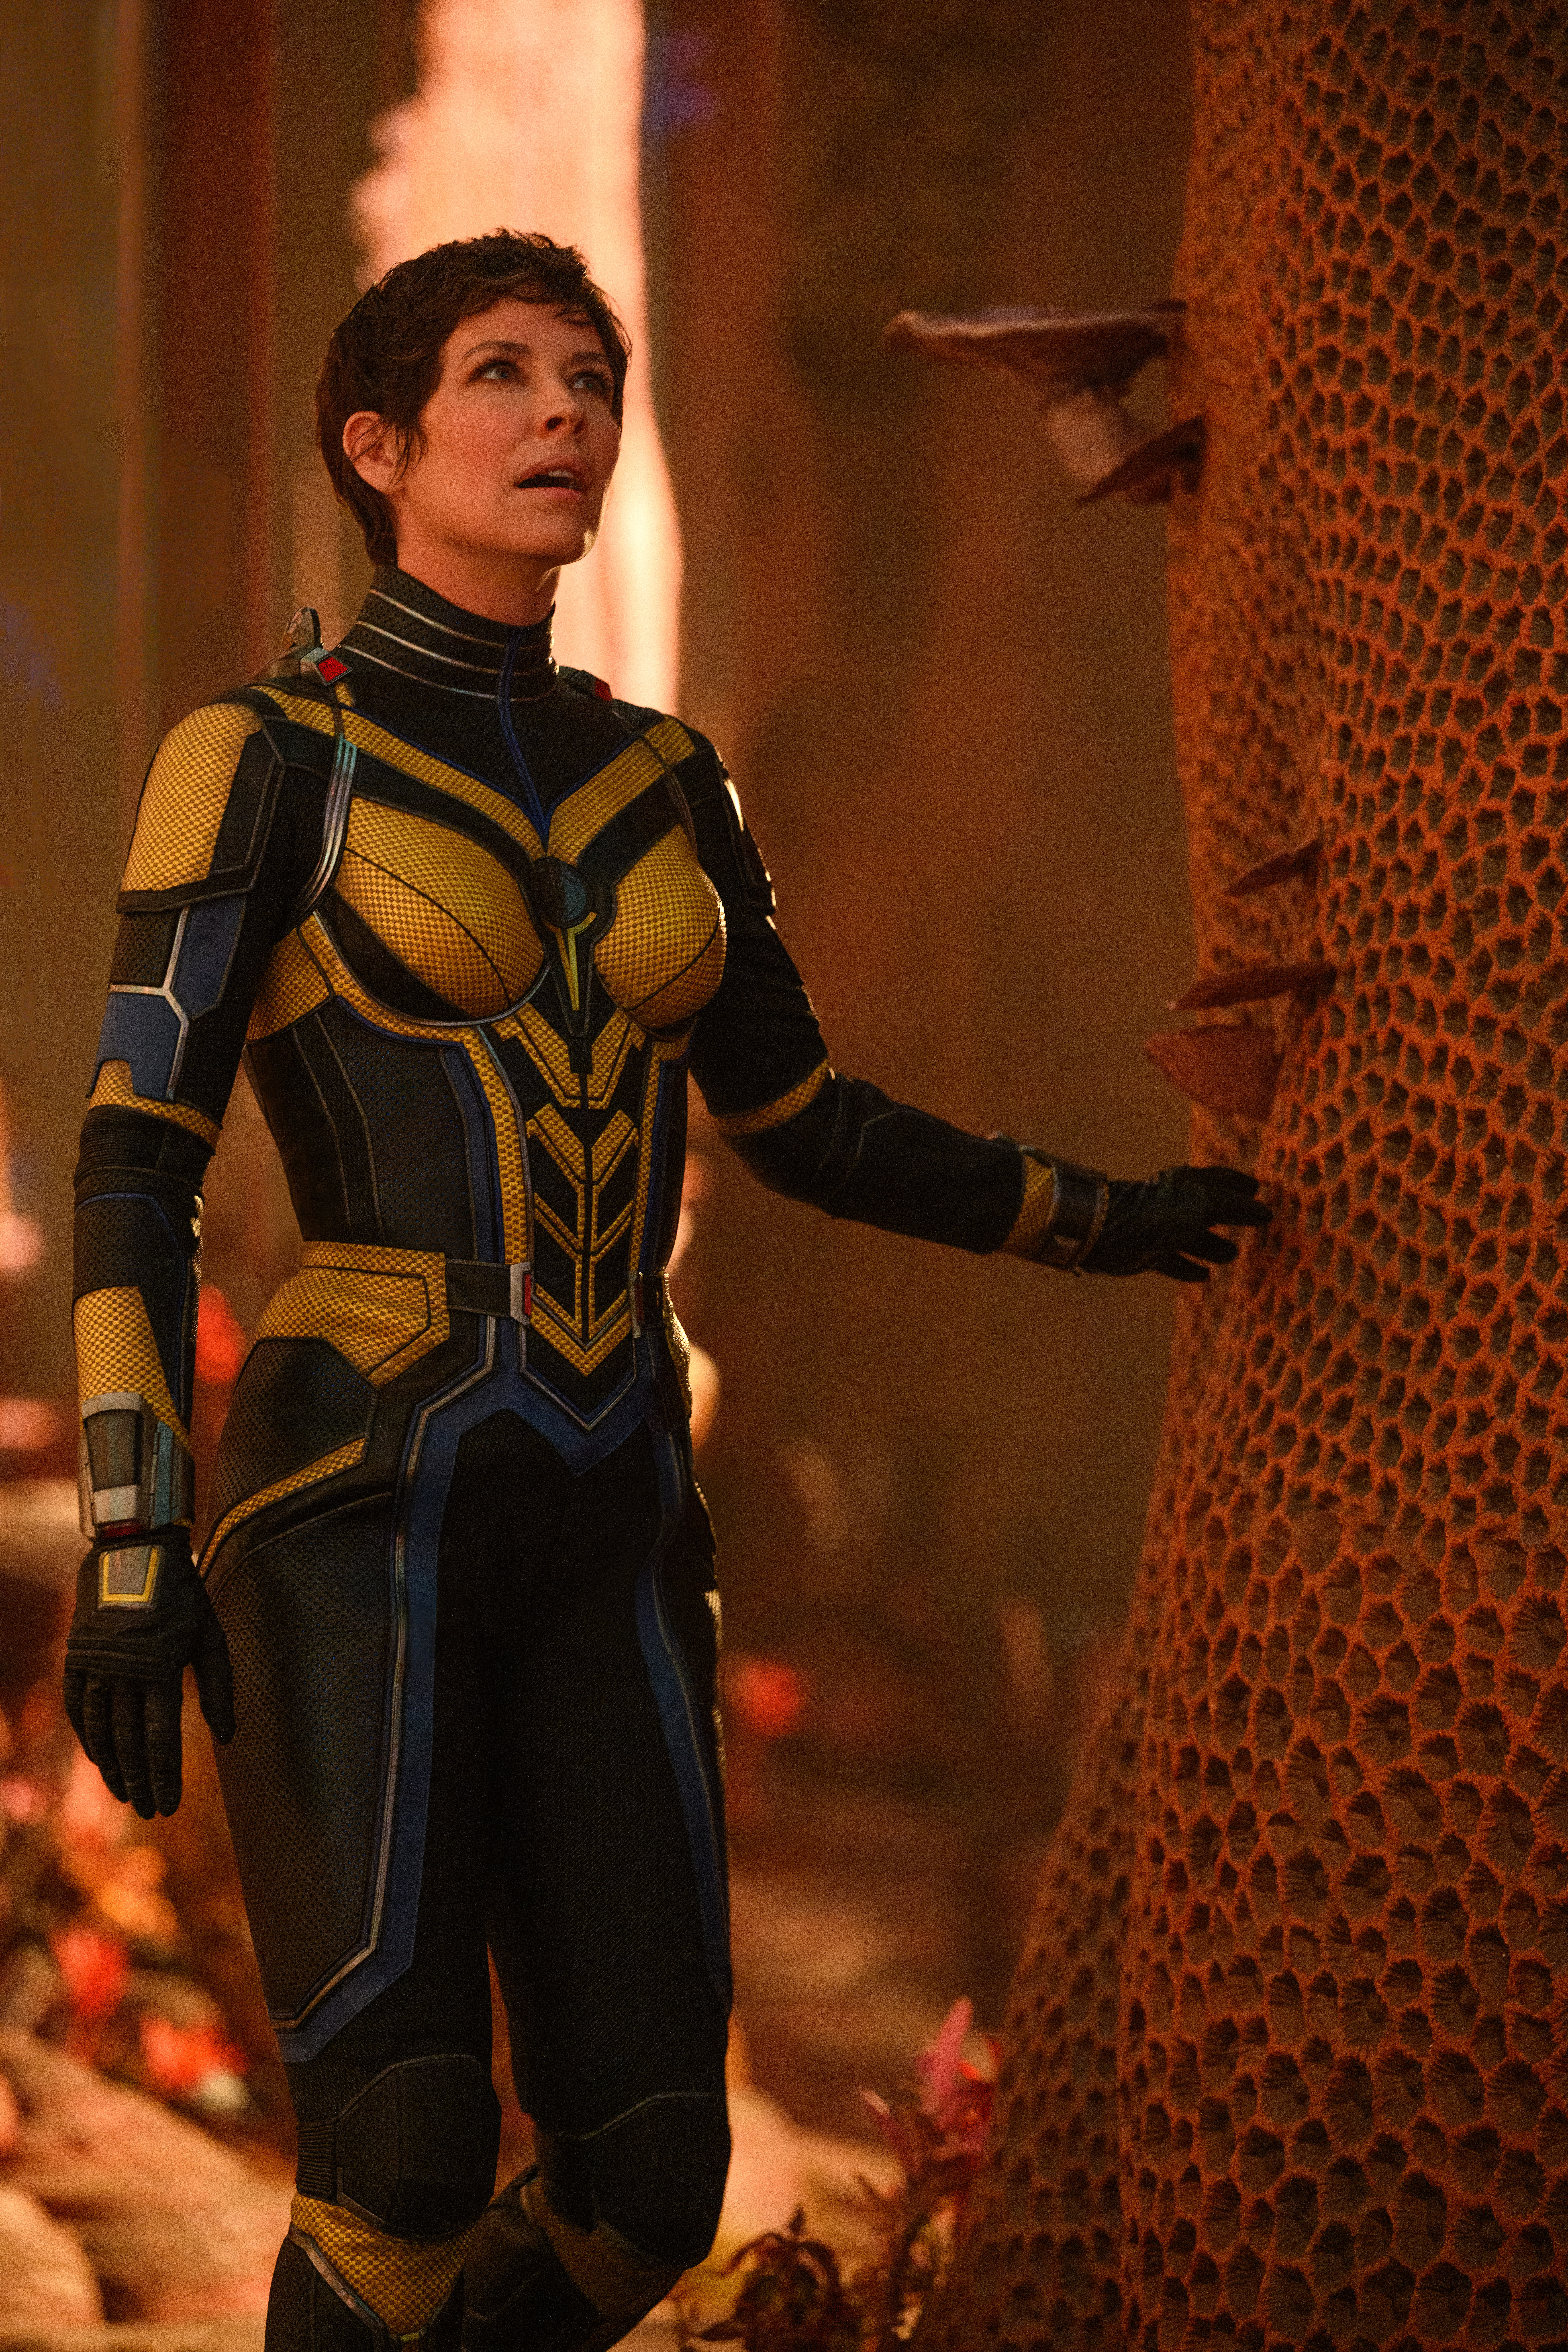 Evangeline Lilly as Hope van Dyne/Wasp in Marvel Studios' ‘Ant-Man and The Wasp: Quantumania’. Photo by Jay Maidment. © 2022 MARVEL.